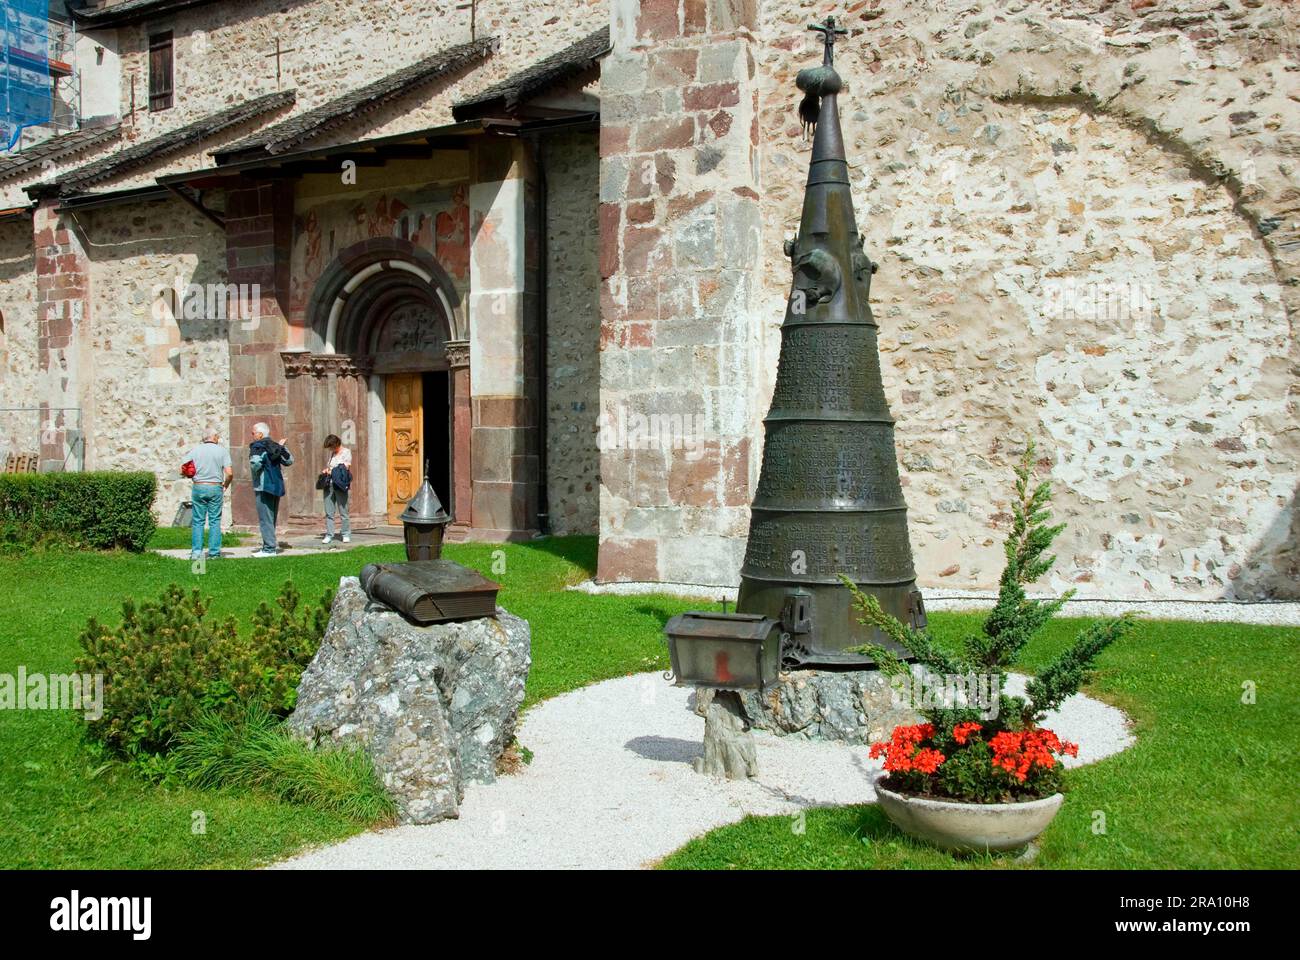 Monument in front of church, San Candido, Trentino-Alto Adige, South Tyrol, Italy Stock Photo